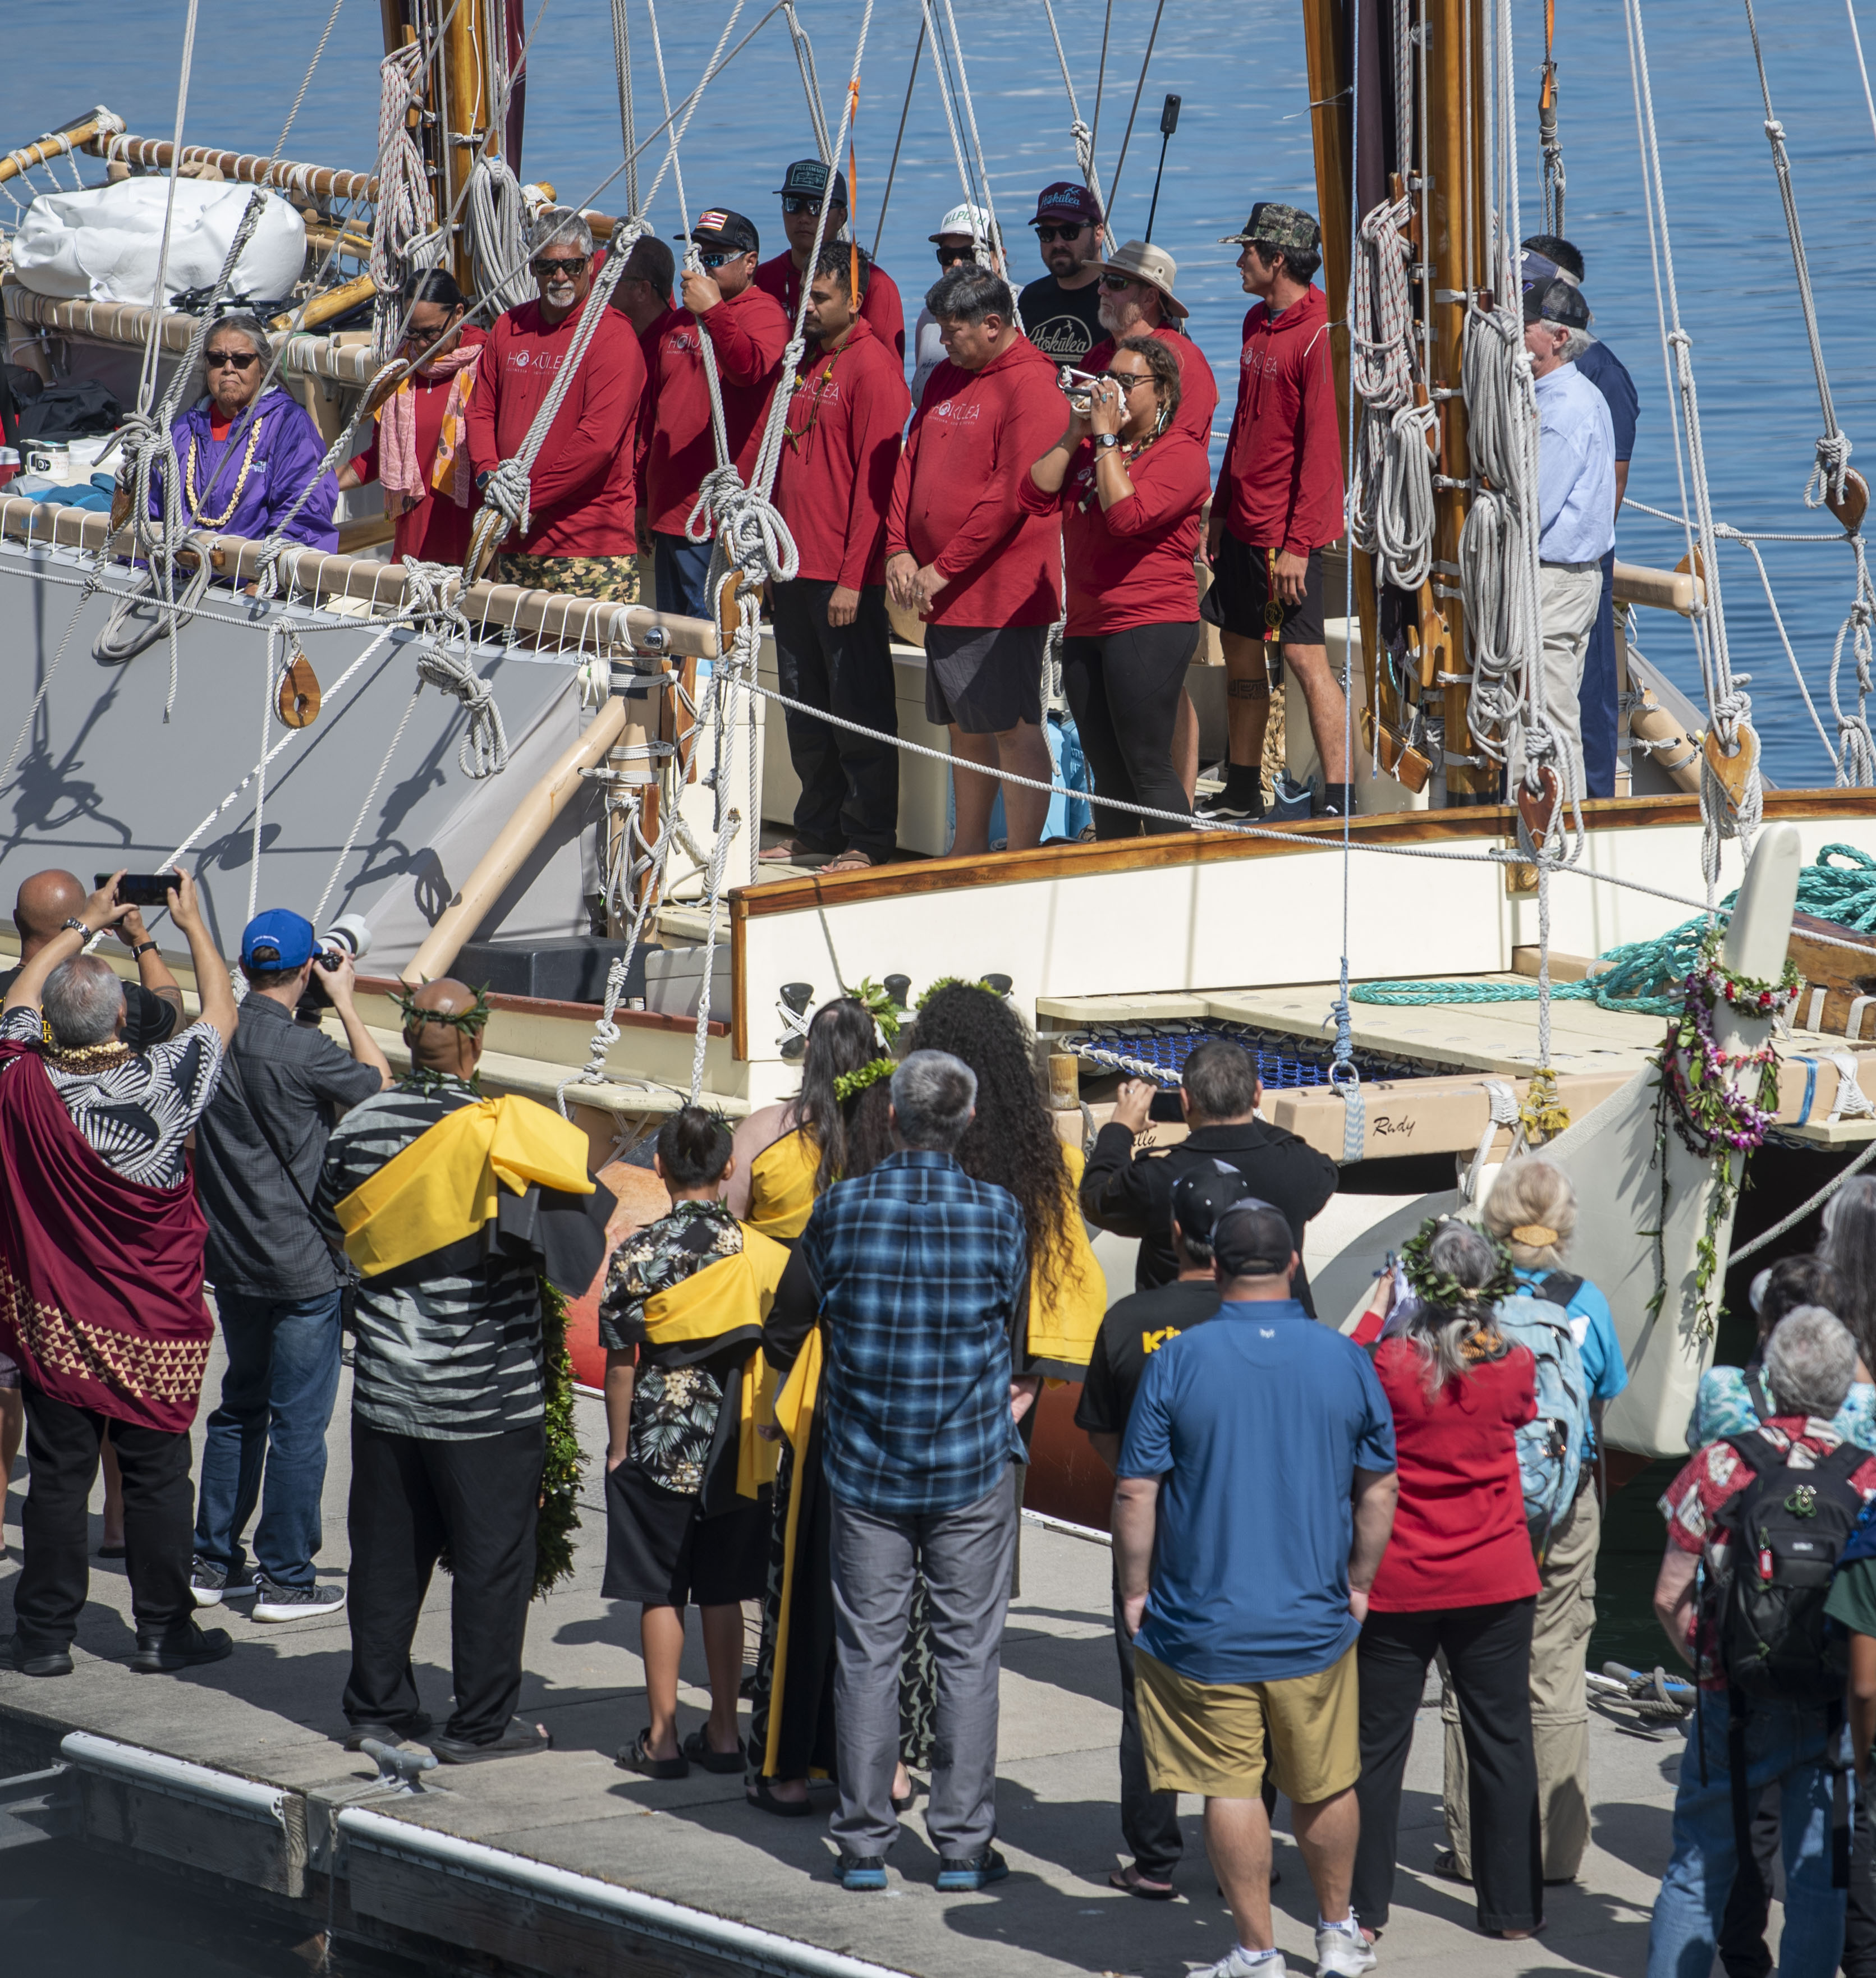 The flotilla then docked at Foss Waterway Seaport and followed landfall protocols before crew members joined the crowd gathered ashore. 